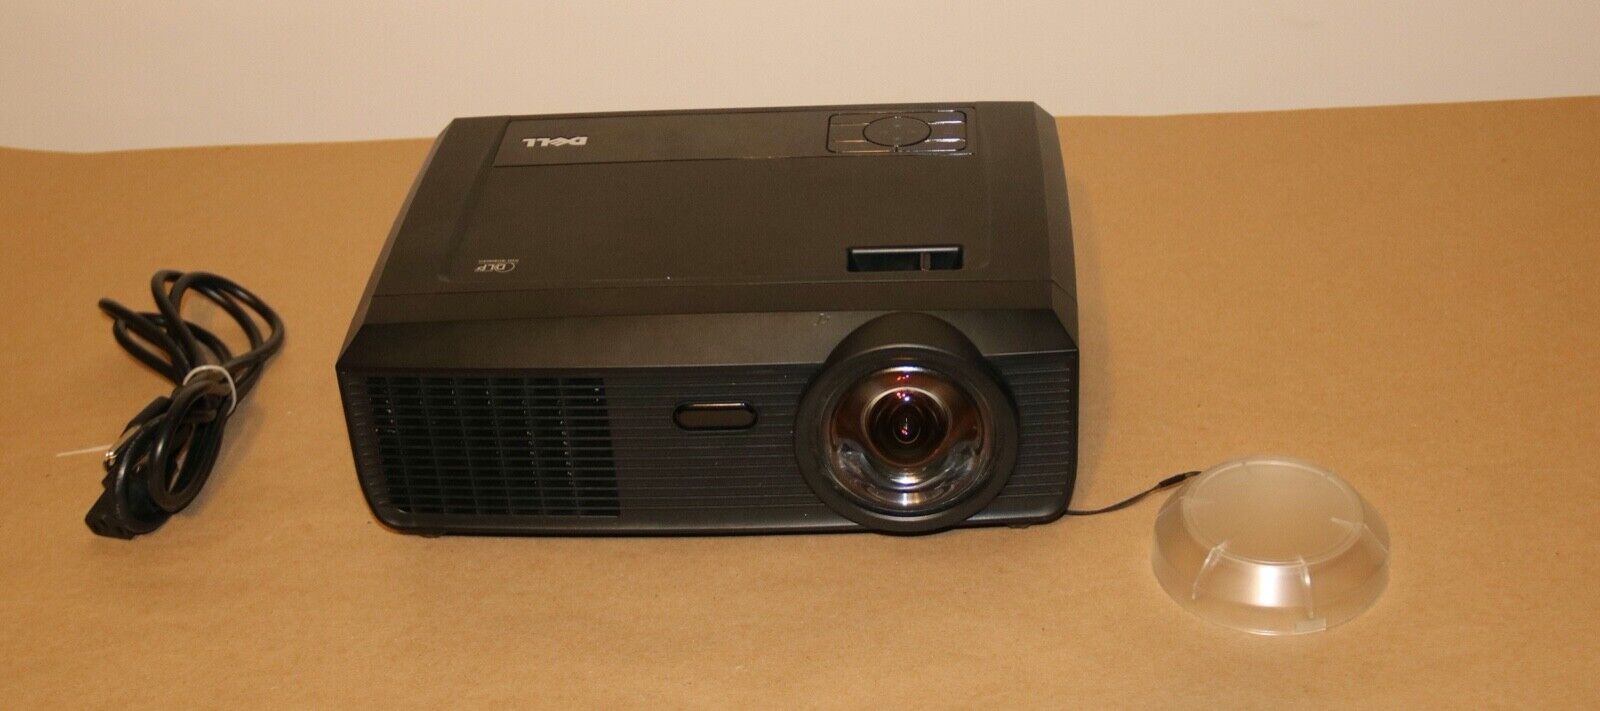 Dell S300wi 2200 Lumens DLP Short-Throw HDMI Projector .Hours Vary 555-901 Hours